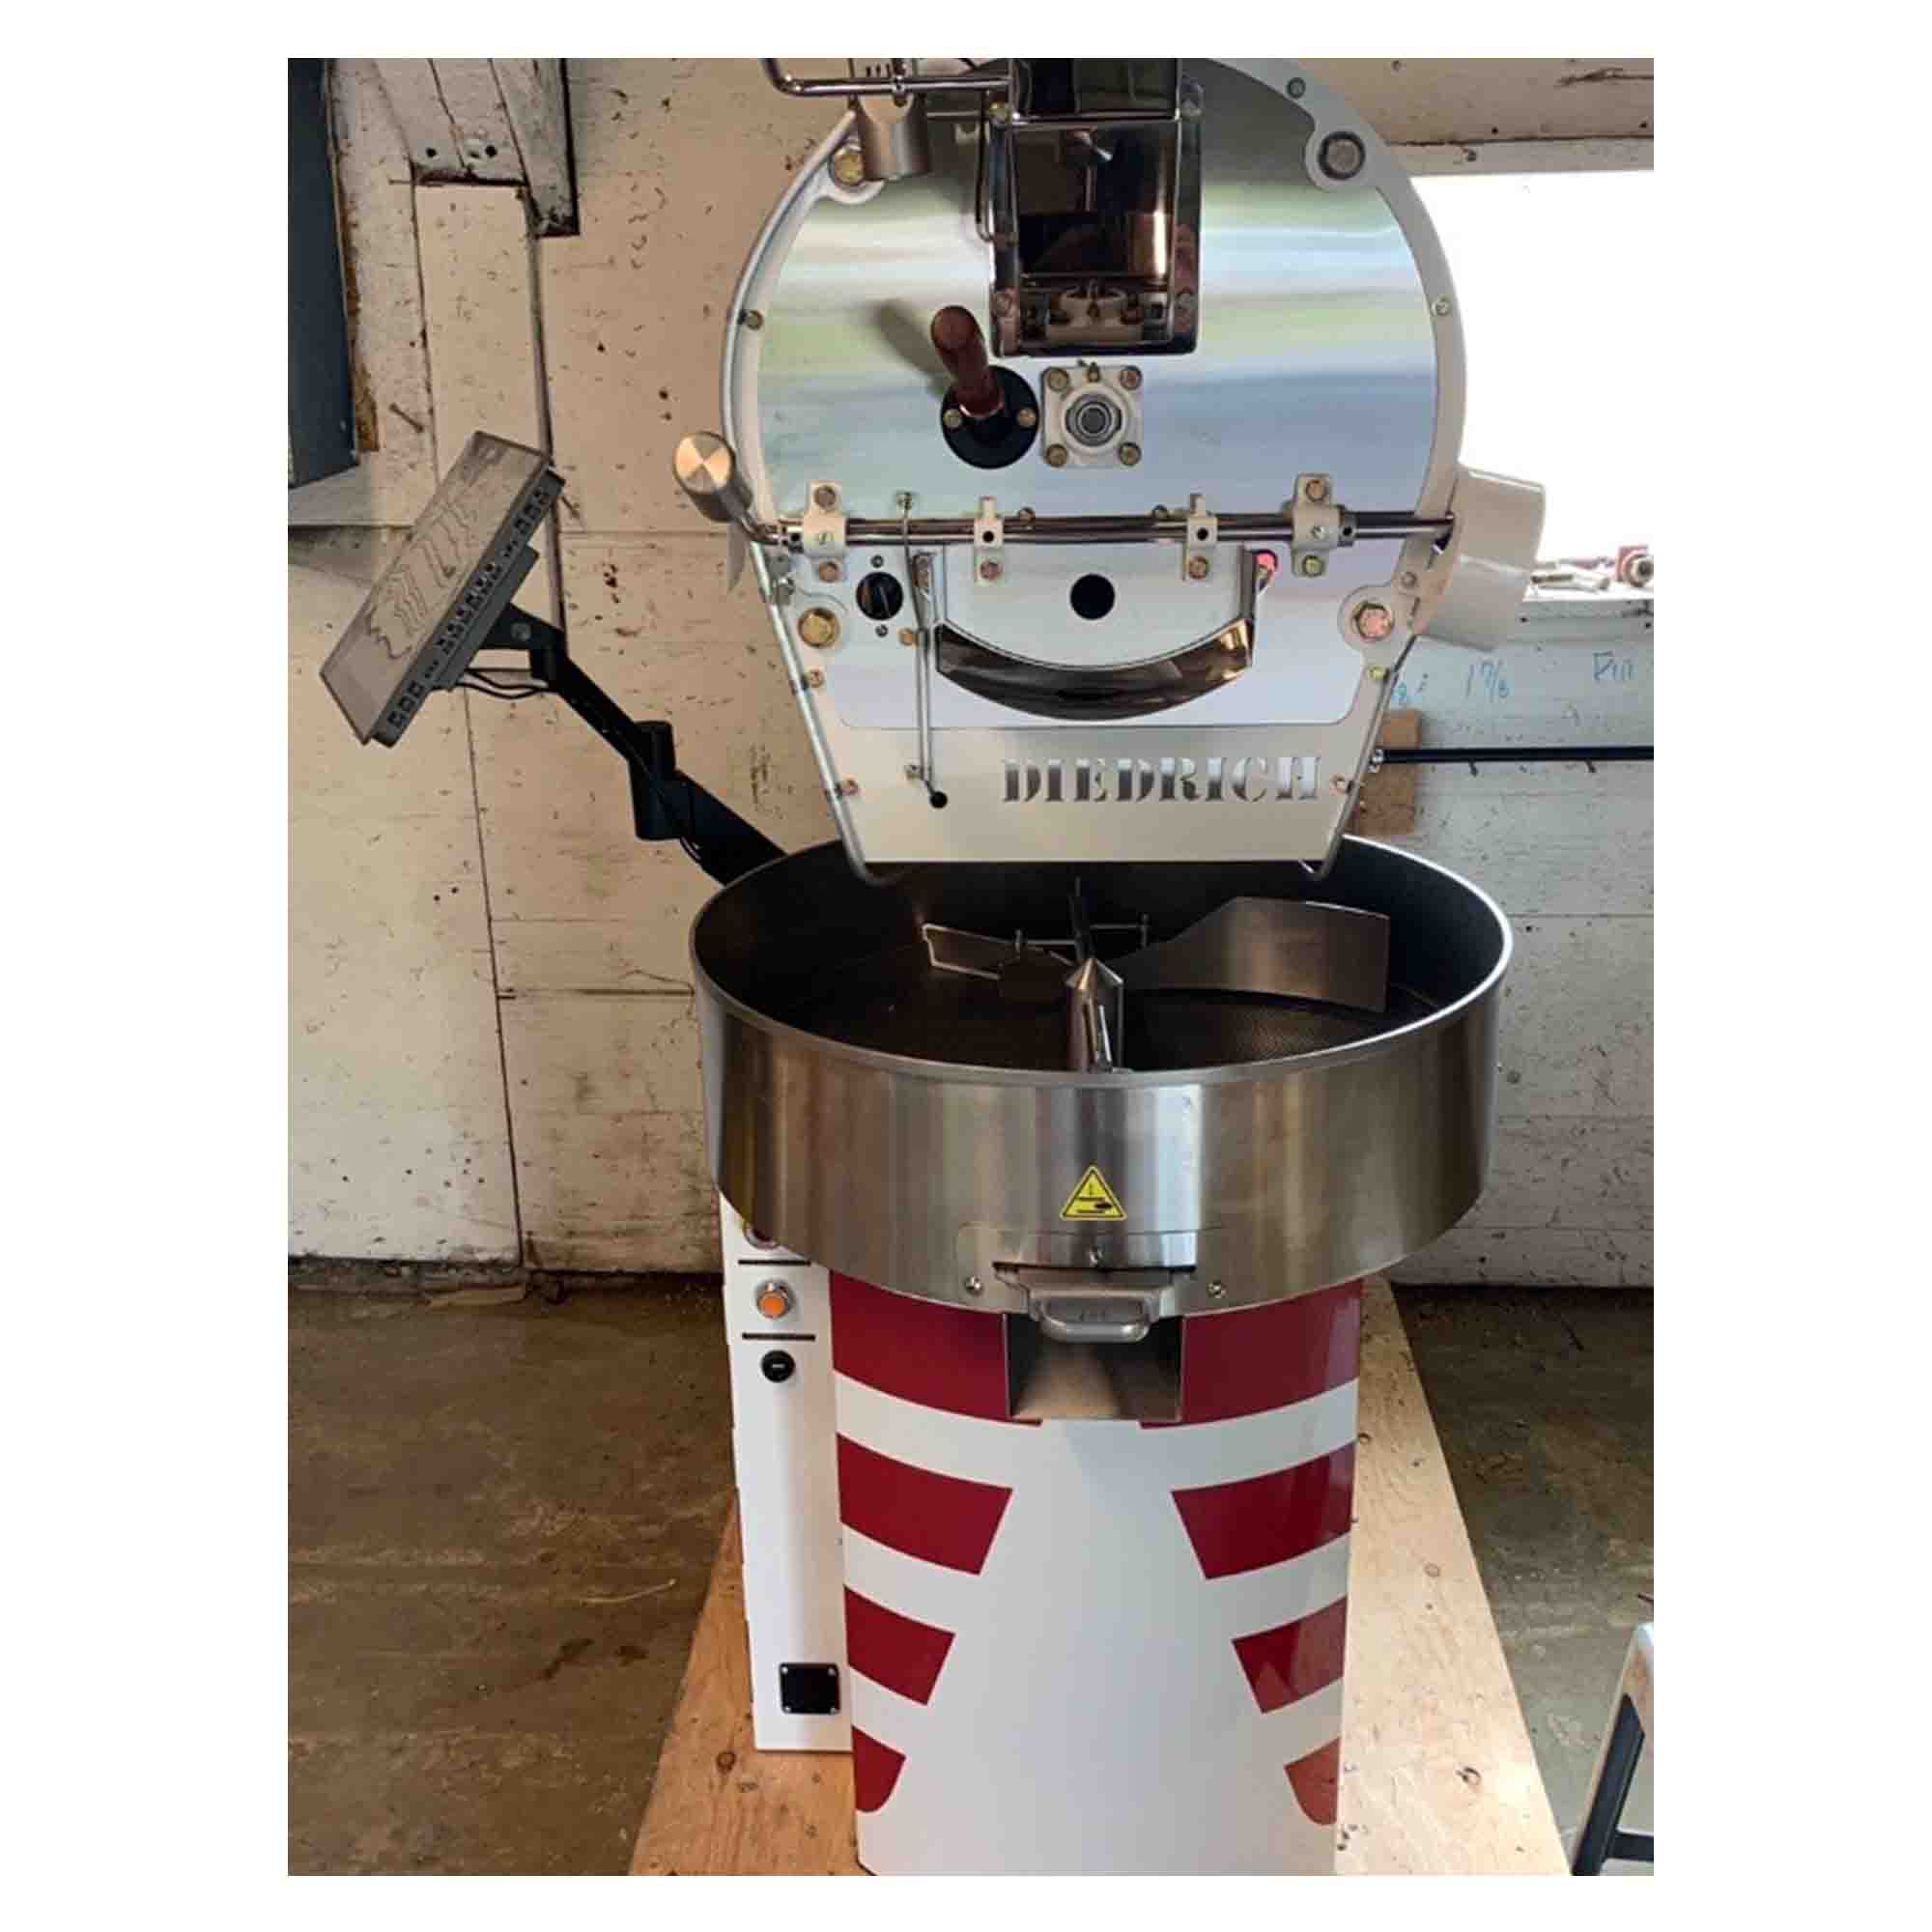 12kg Used Coffee Roaster - Diedrich Fully Automated IR-12 with Afterburner - Never Used - 2018